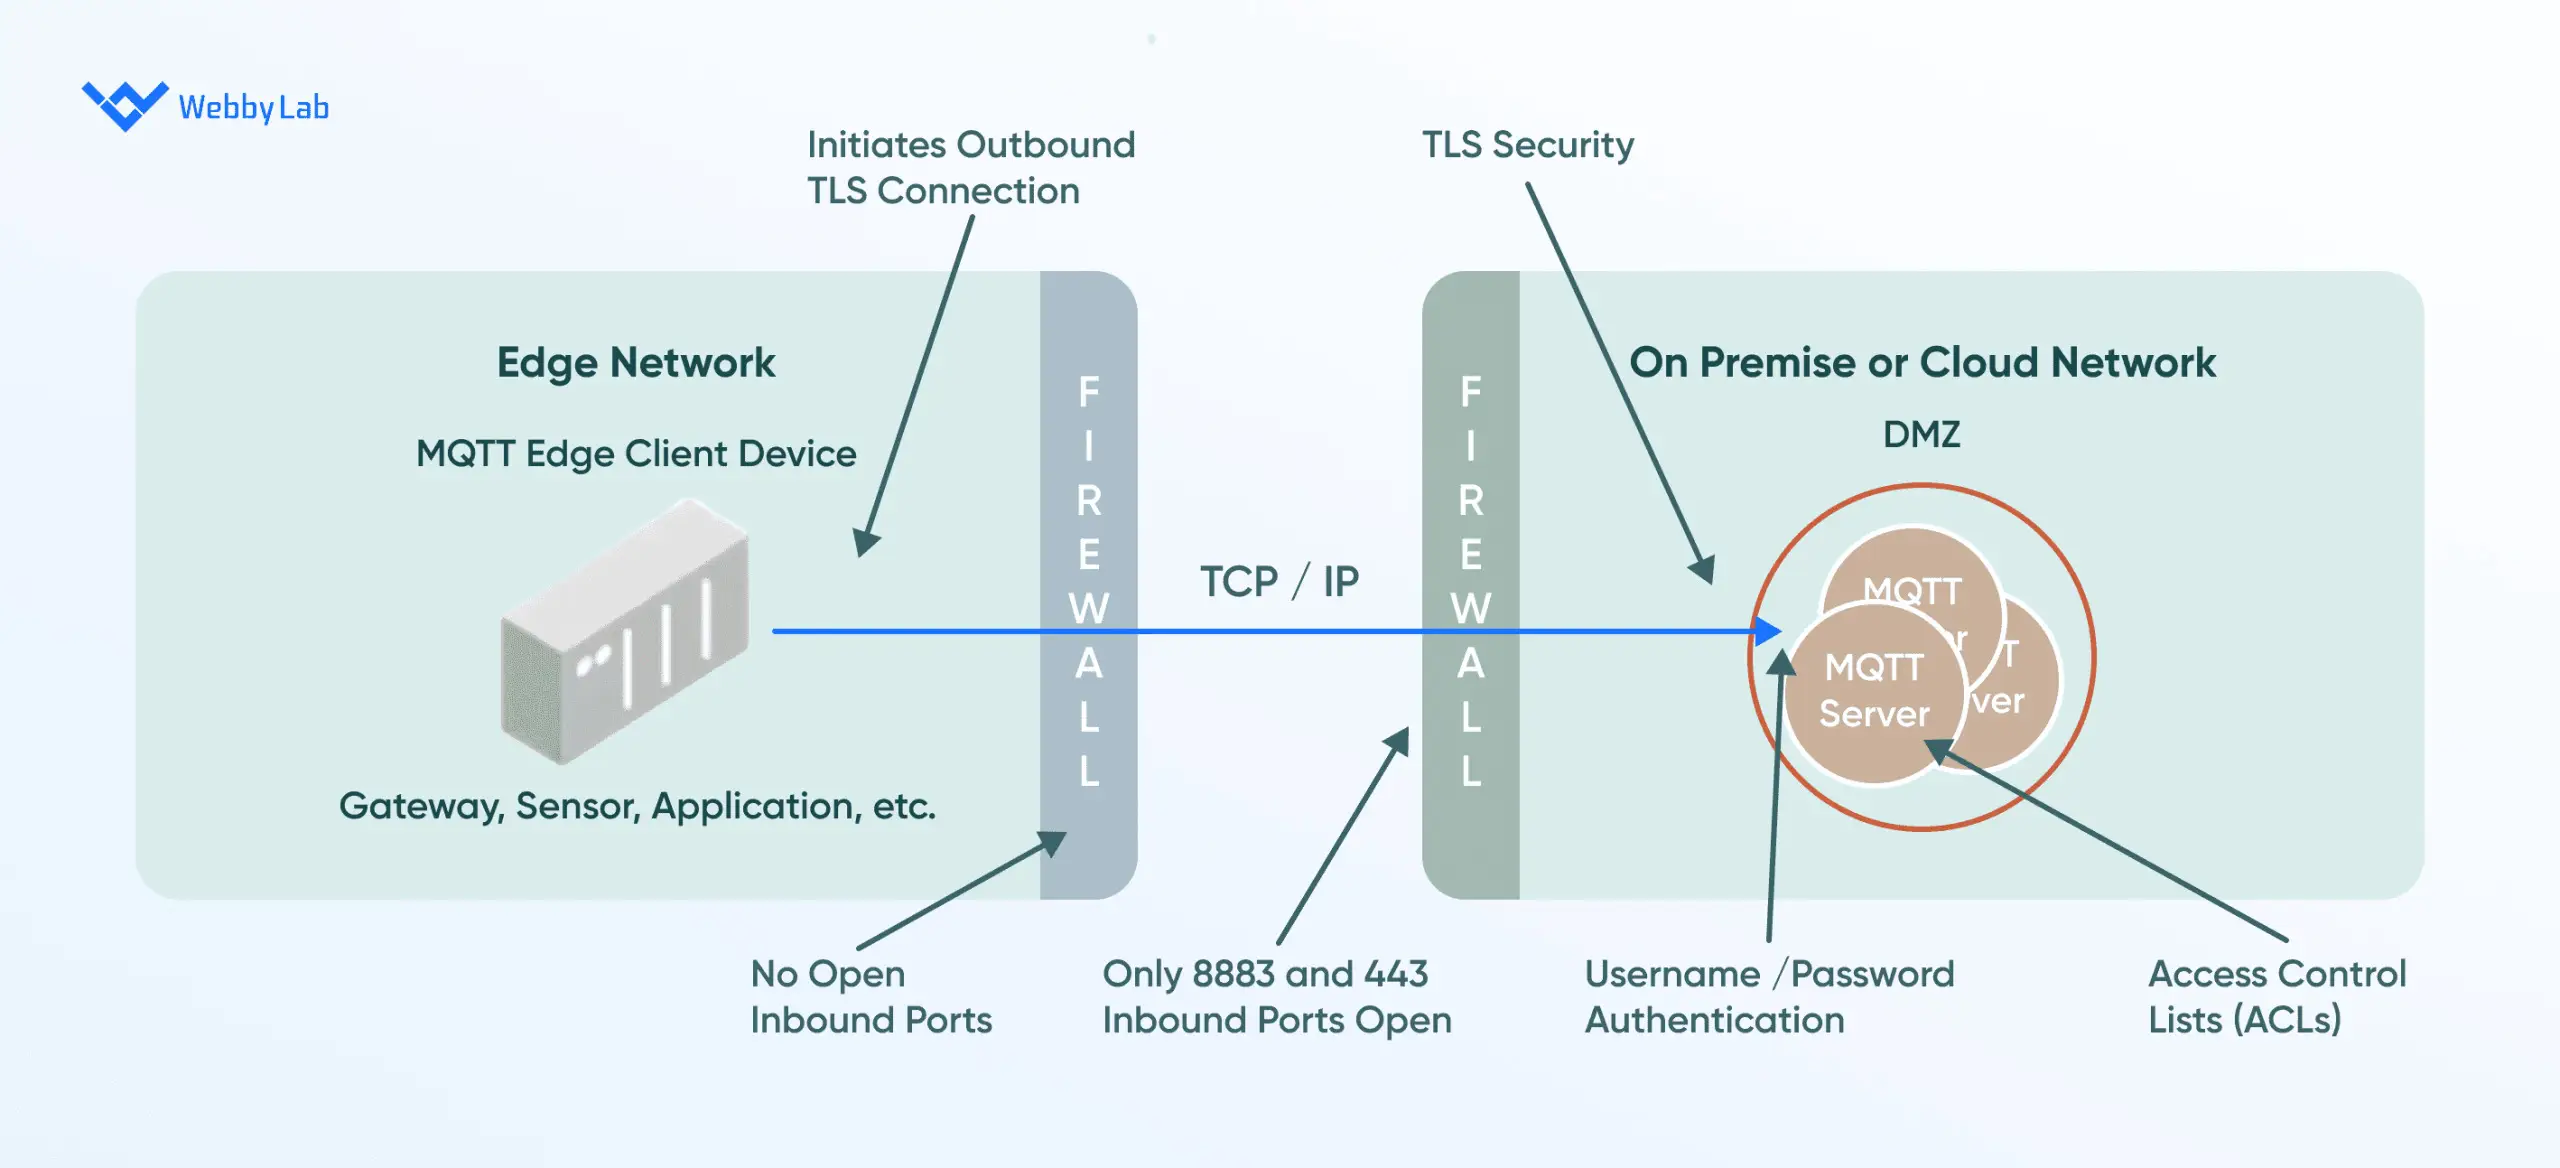  The MQTT using TSL and a firewall for security.